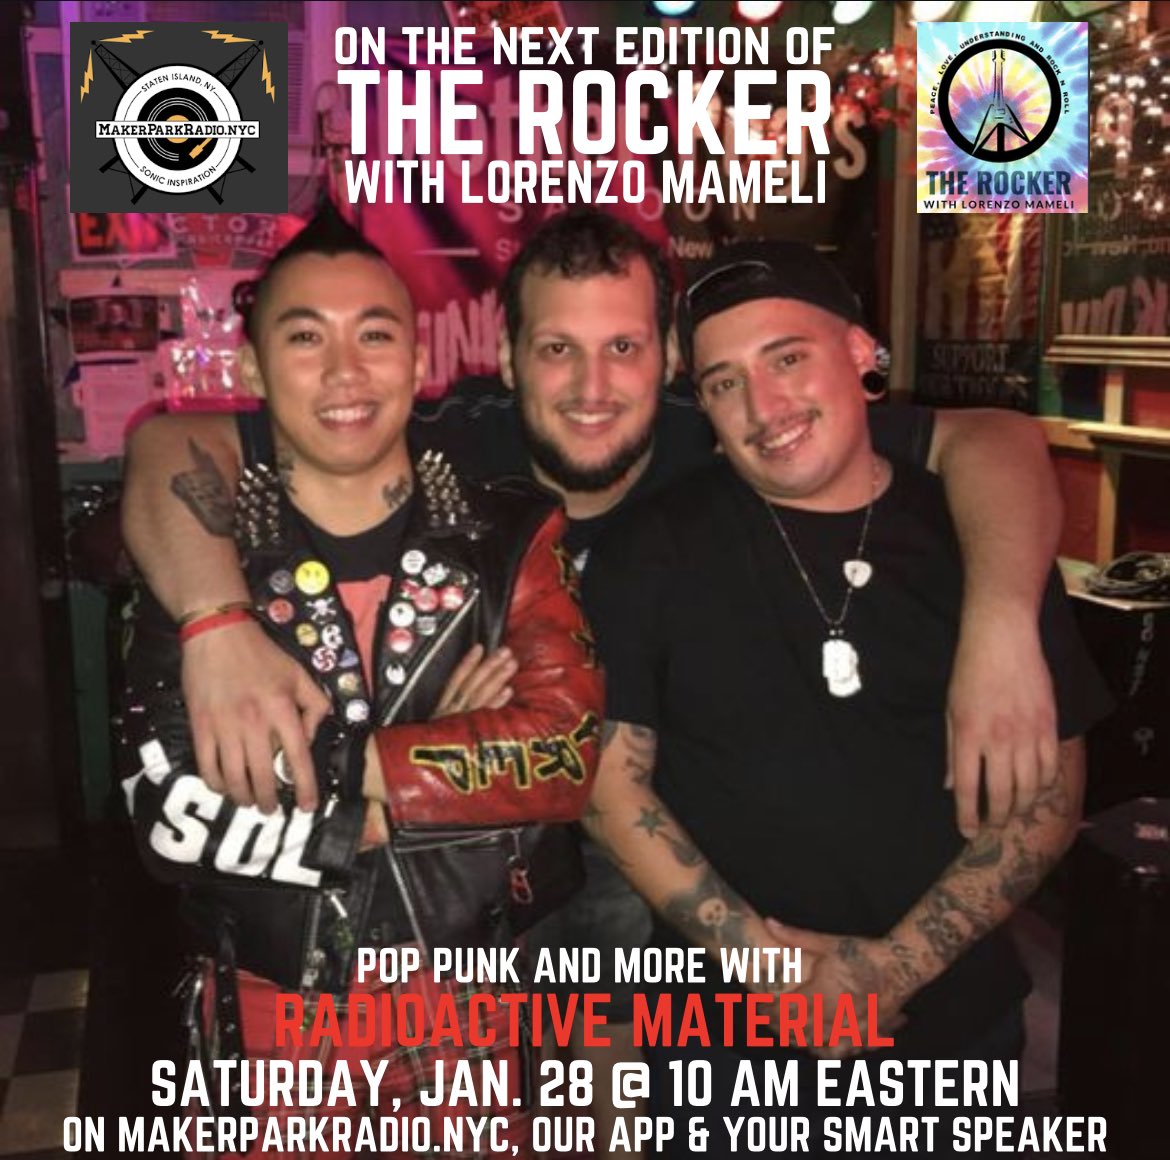 We’re gonna have a rockin’ good time with these guys! You’re invited to join us. No RSVP required. Just tune it in and turn it up! #makerparkradio #RadioactiveMaterial #poppunkmusic #therockernyc